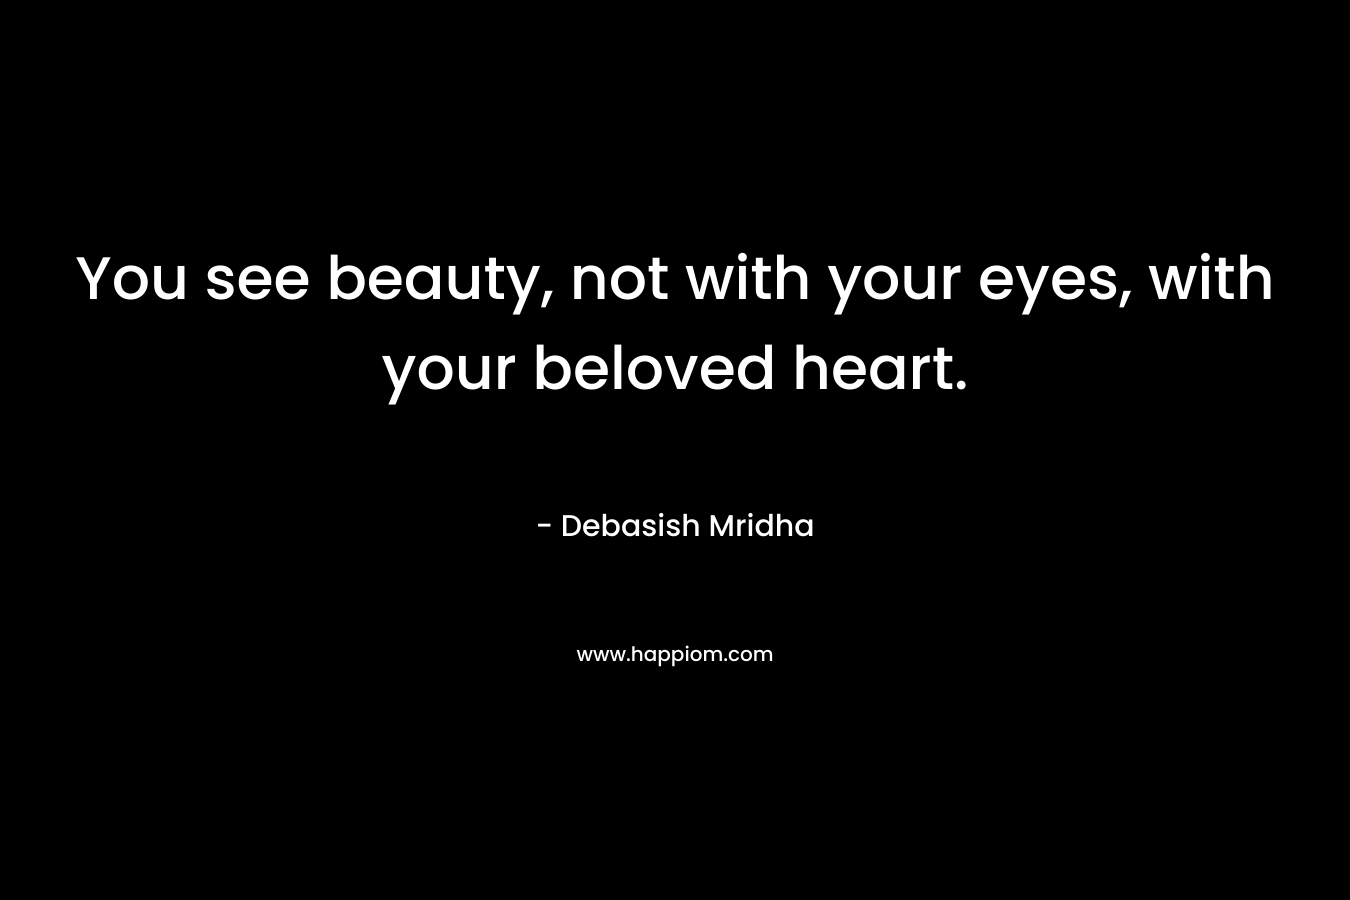 You see beauty, not with your eyes, with your beloved heart.